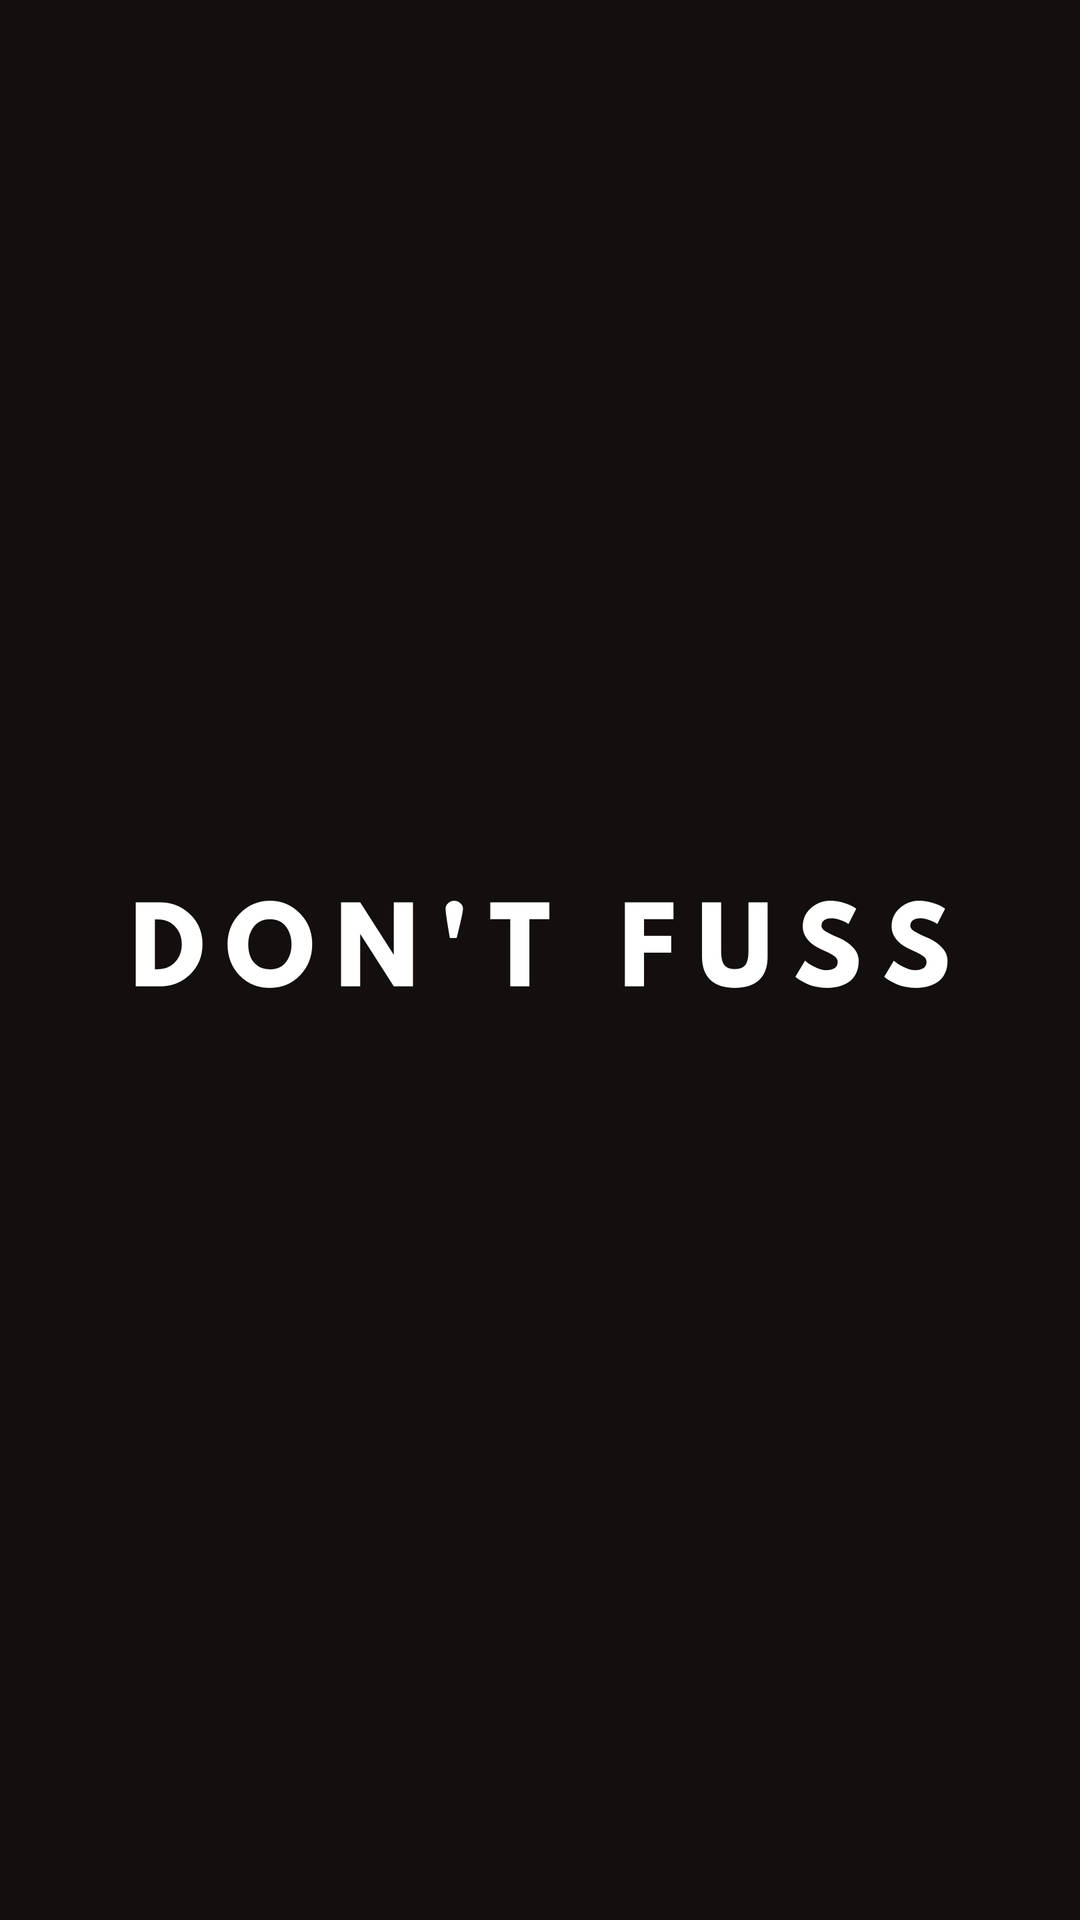 Don't Fuss Inspirational Quote Background